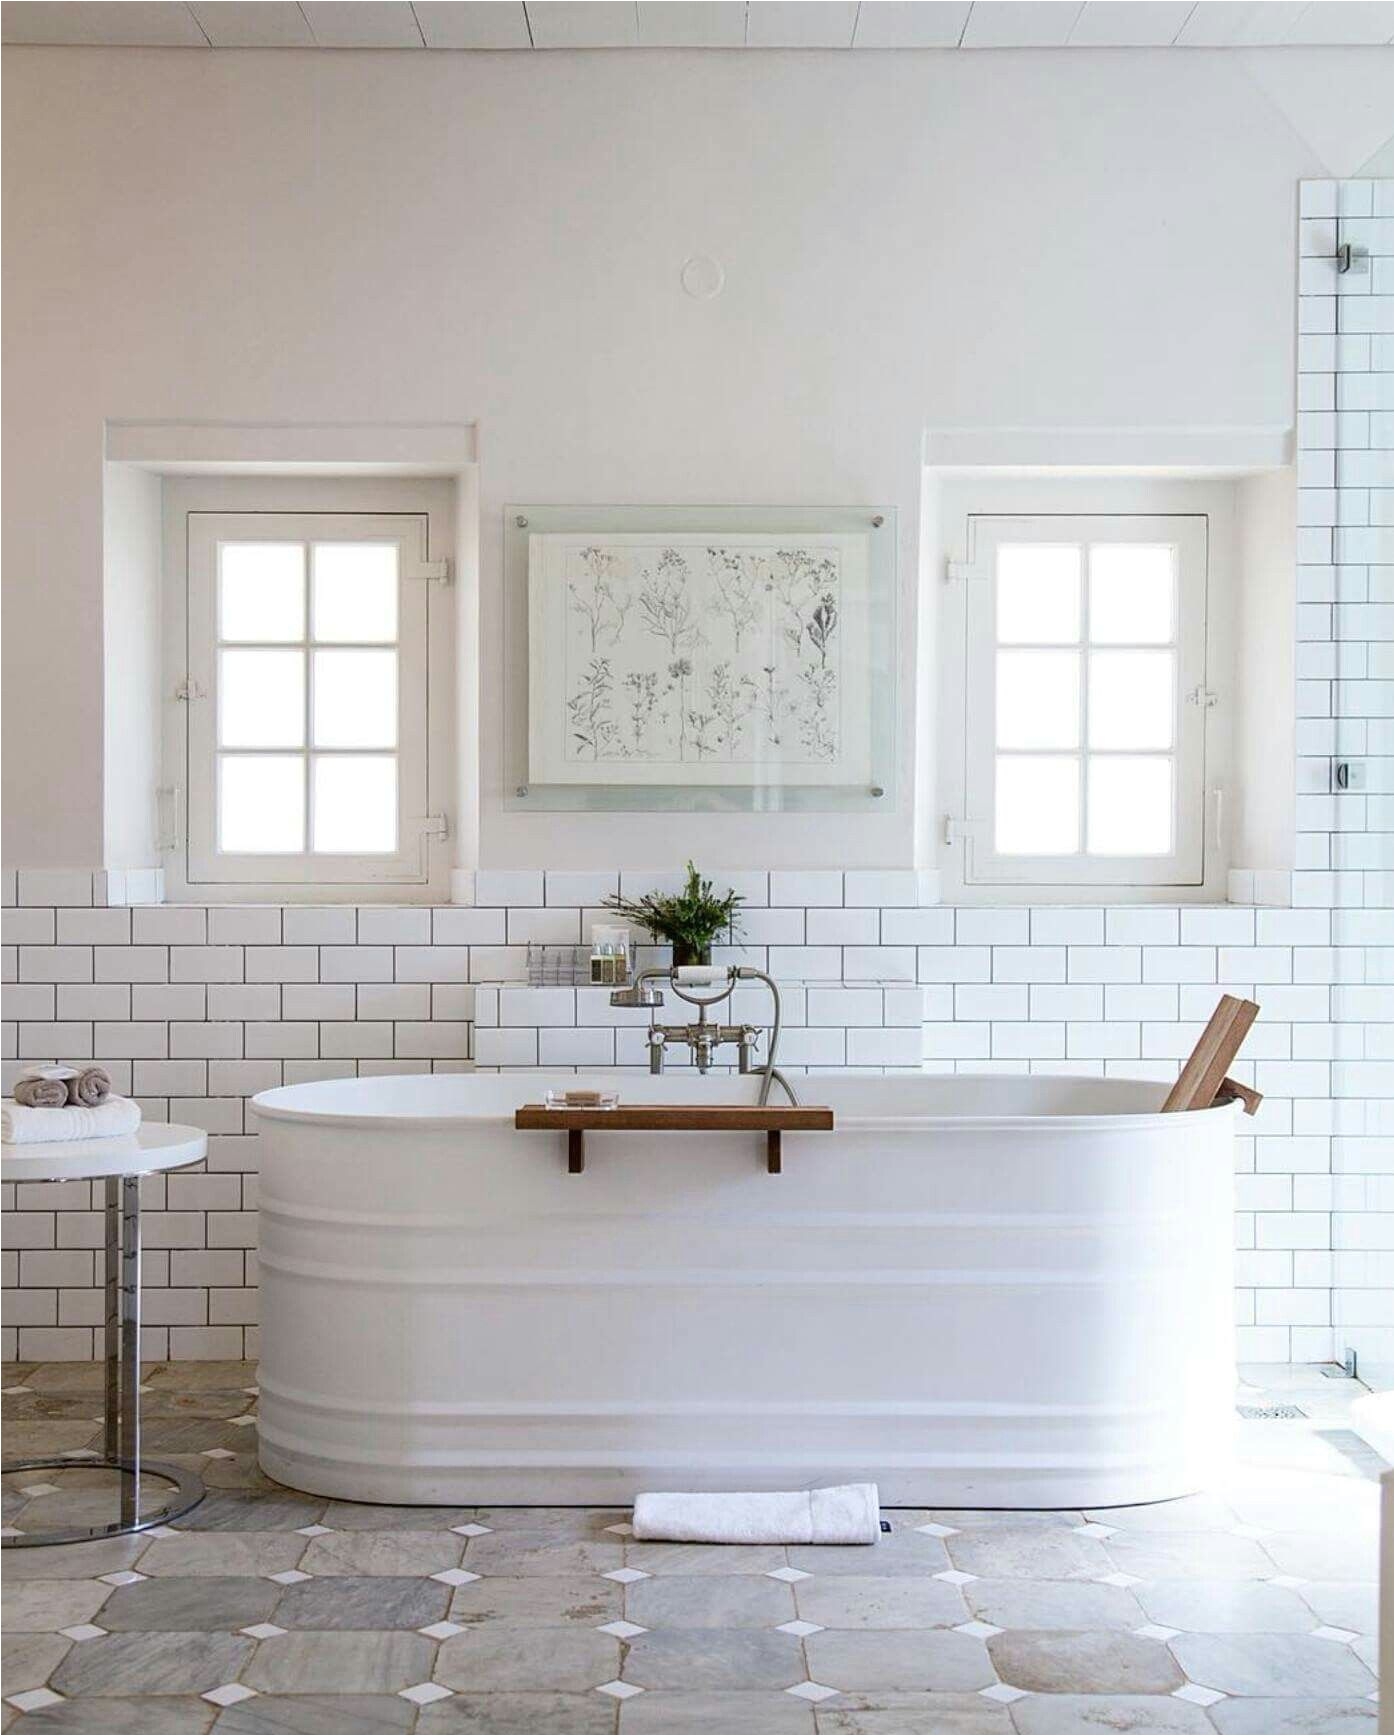 Heart Shaped Bathtub Watering Trough Painted White Perfect Home Ideas Pinterest